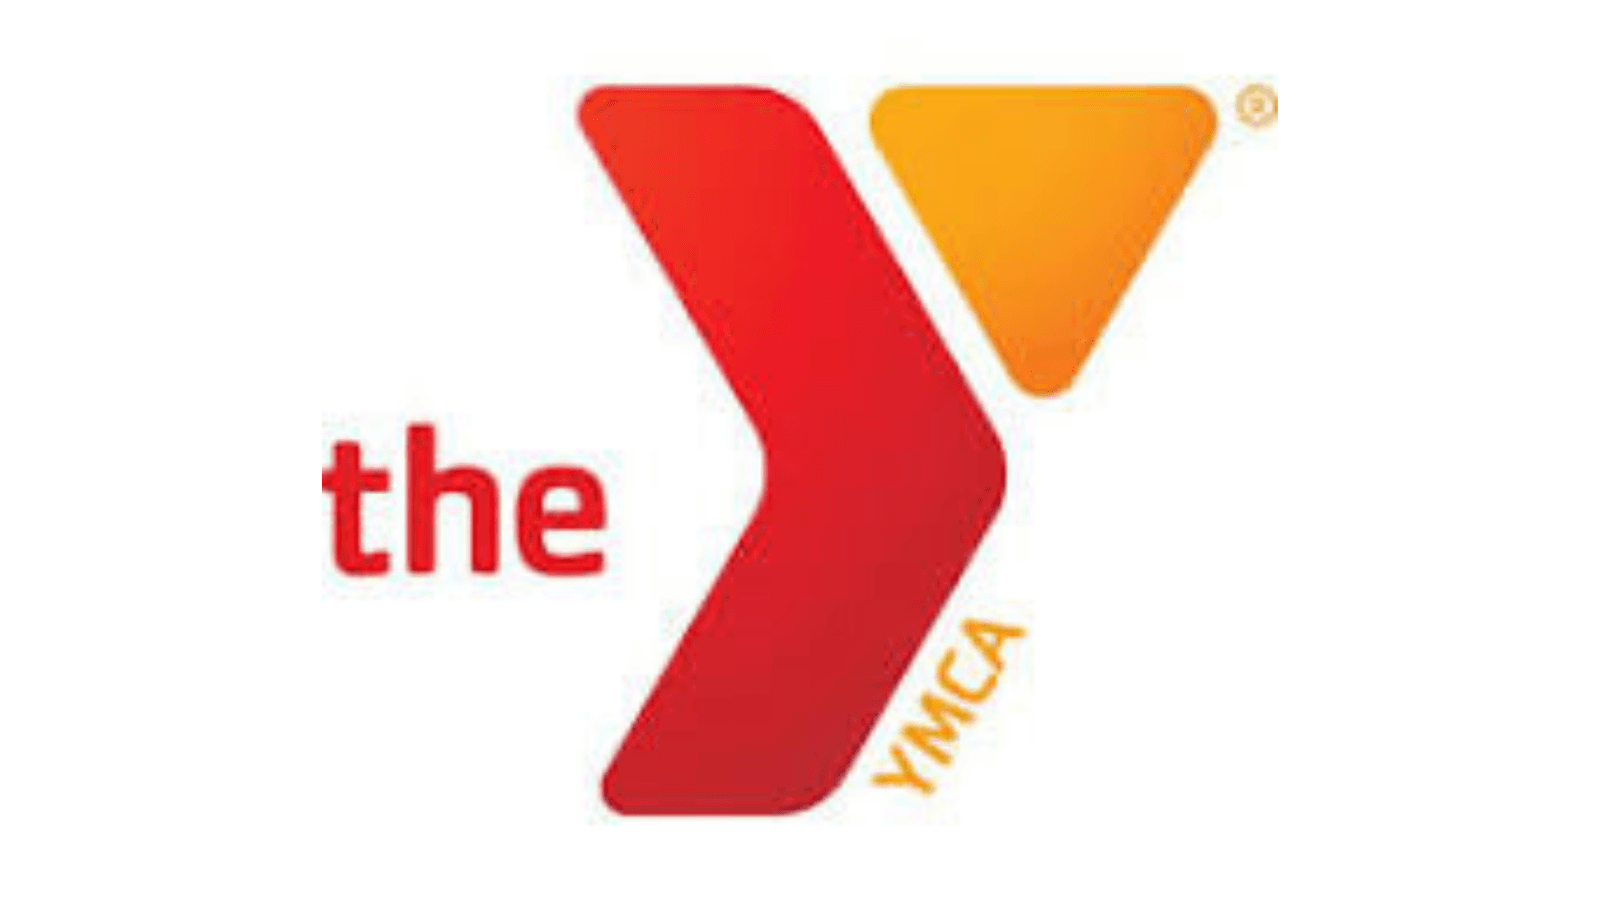 Greater Green Bay YMCA looks to build facilities and programs